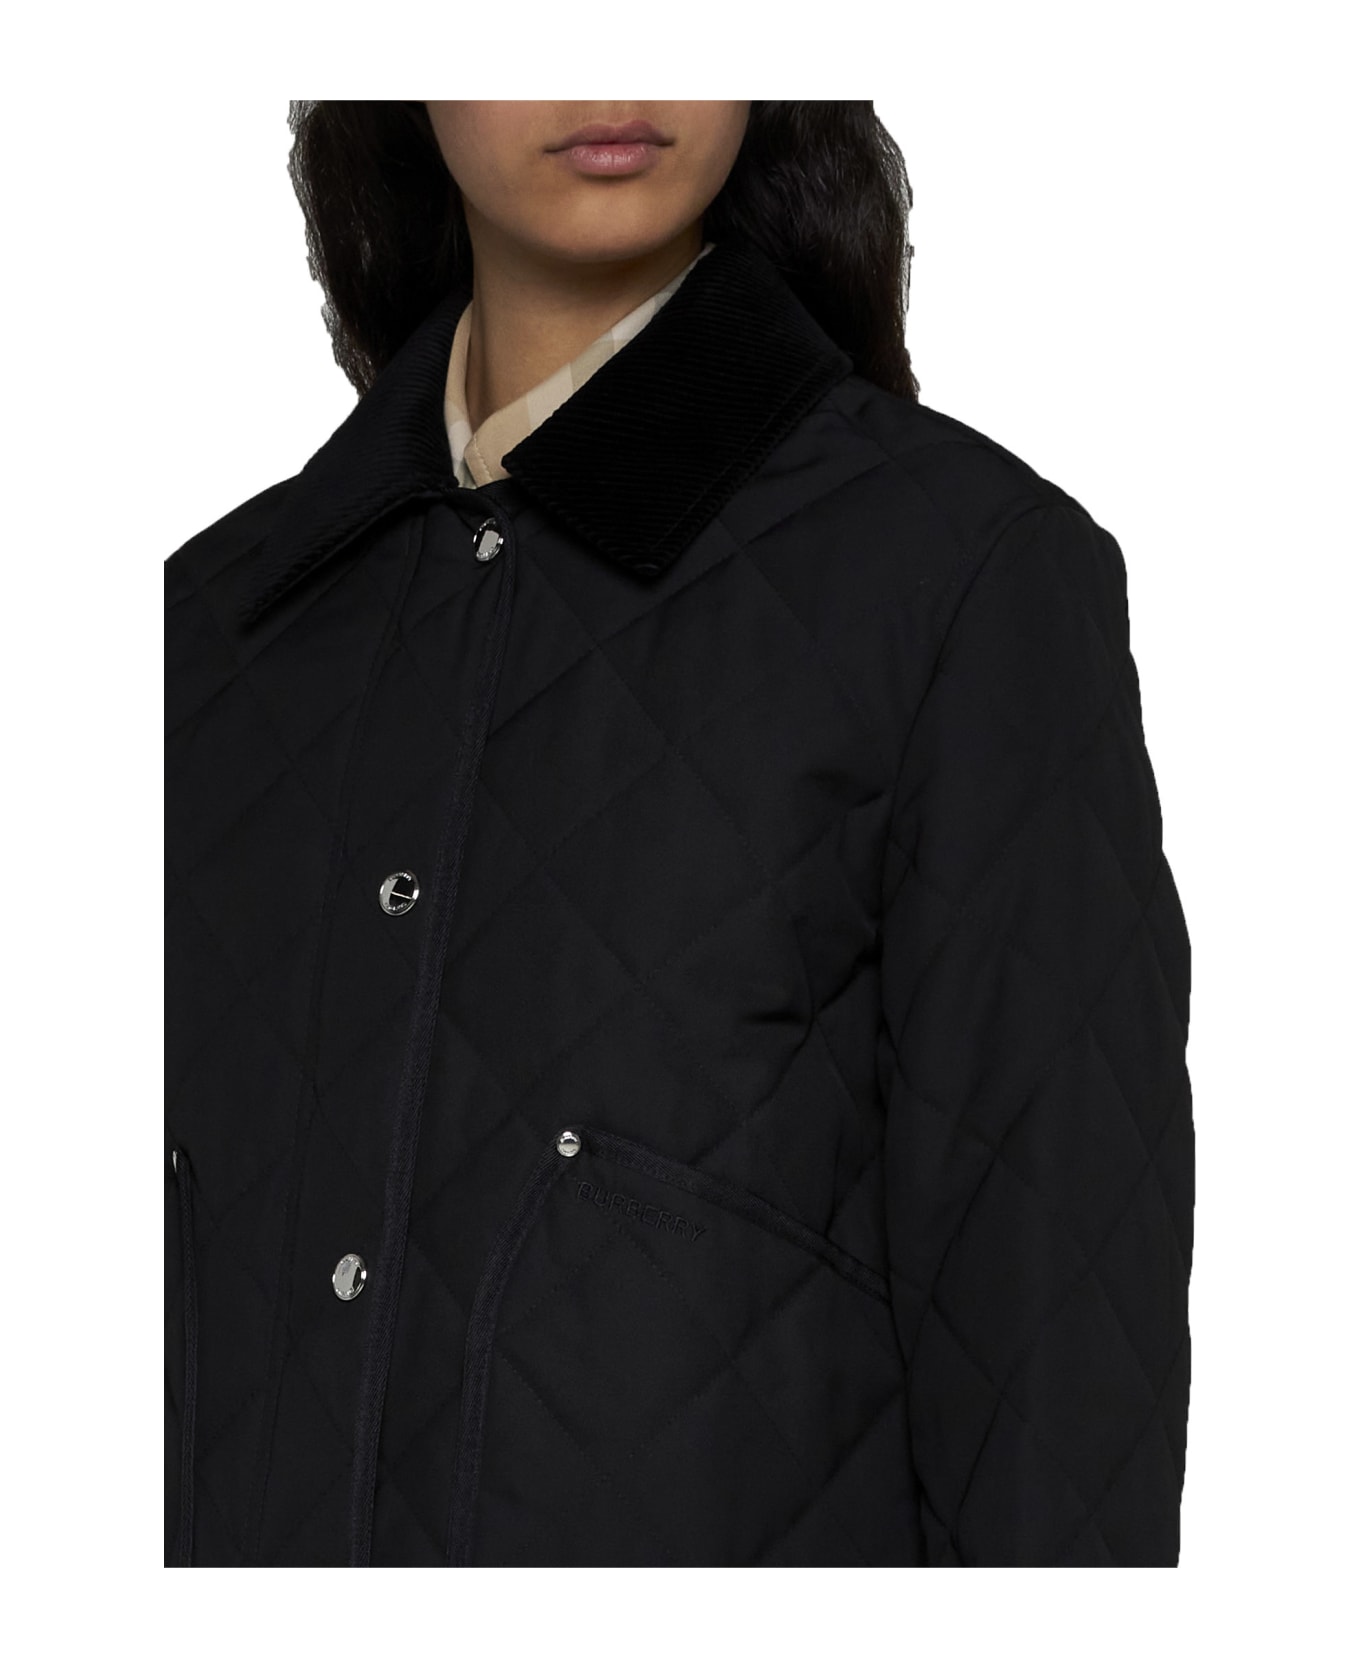 Burberry Lanford Quilted Fabric Jacket - Black ジャケット